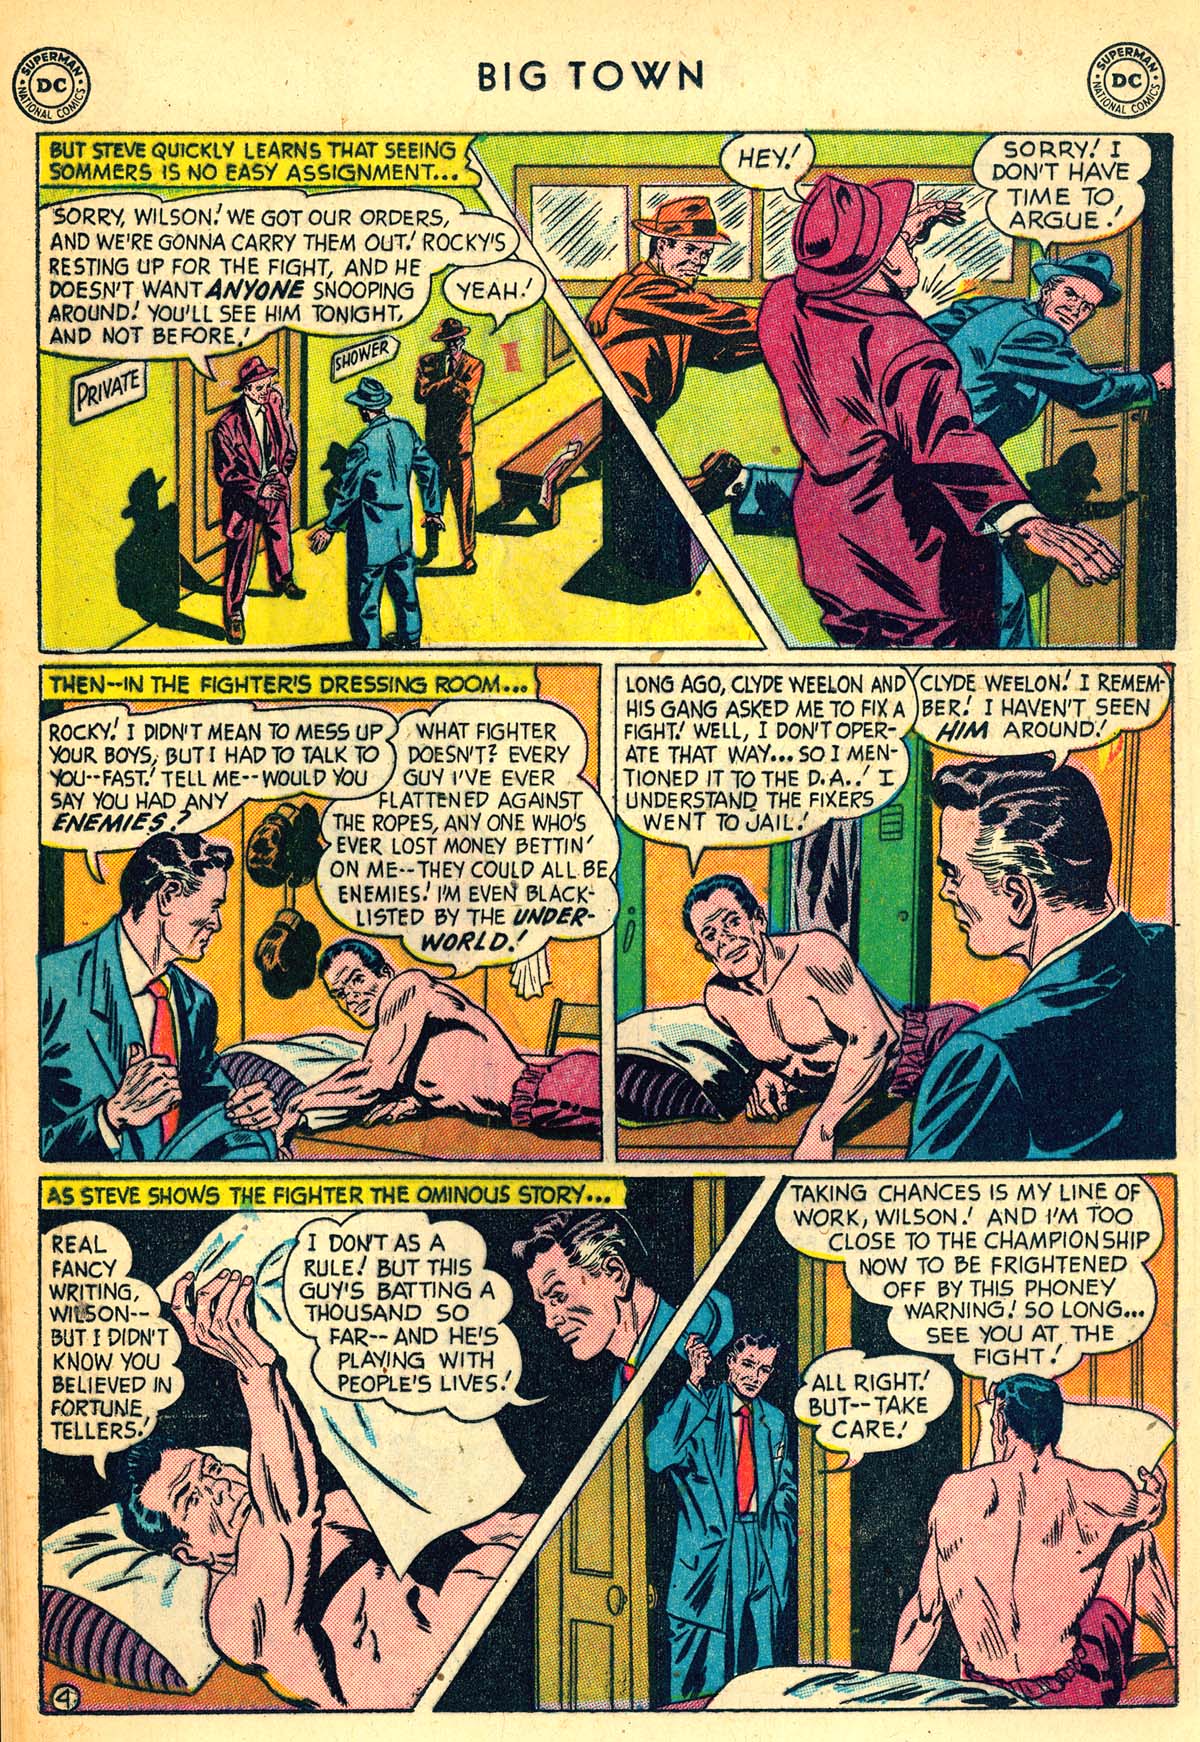 Big Town (1951) 10 Page 15